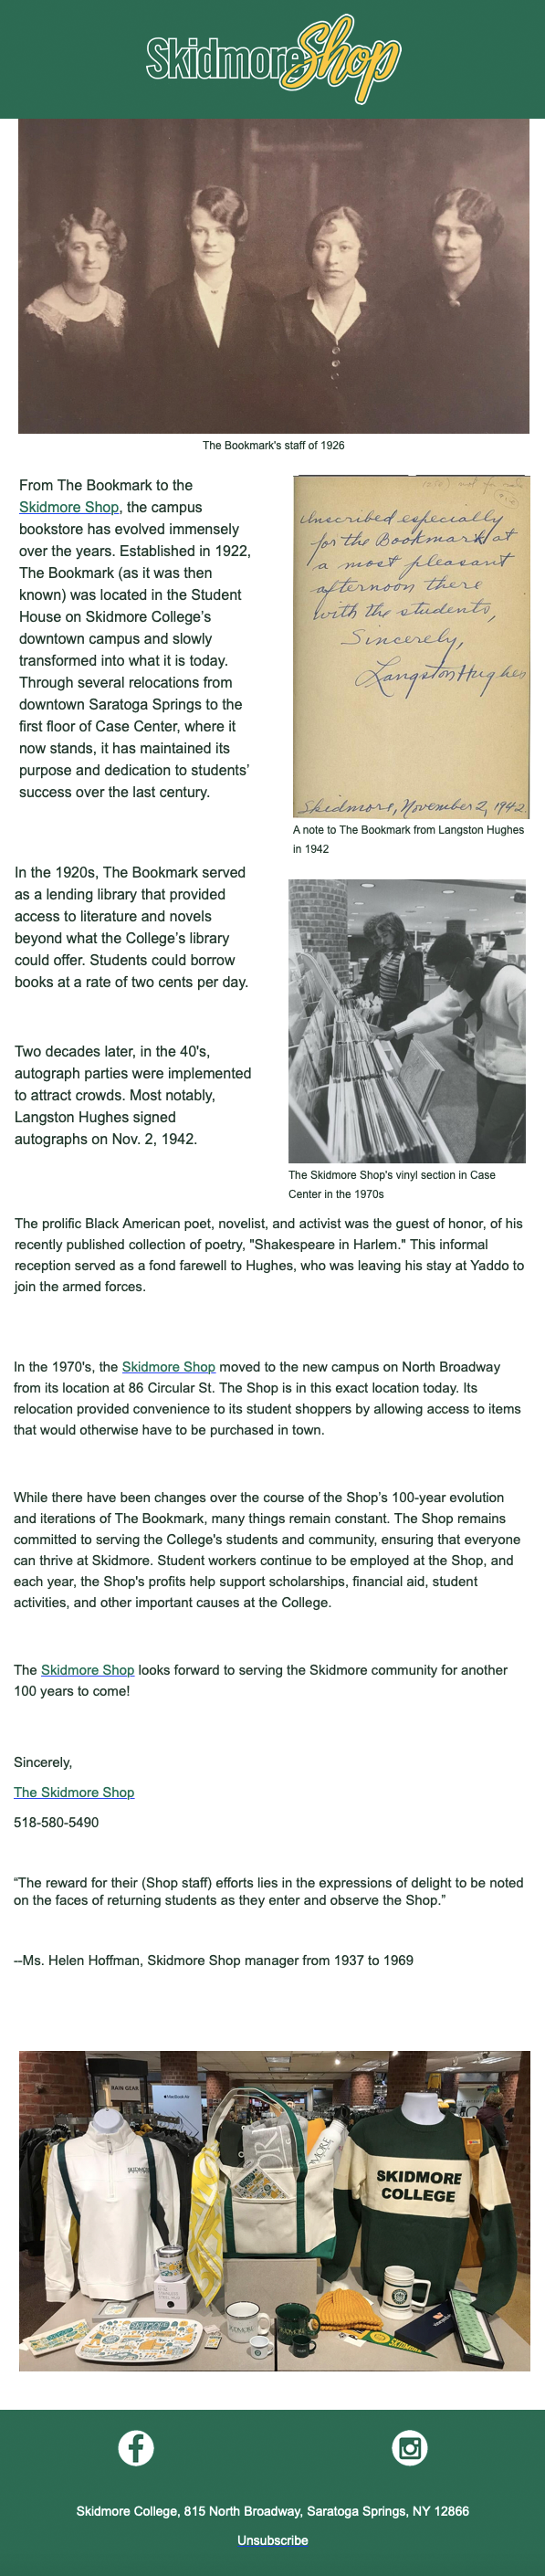 Newsletter sample - The Skid Shop then and now